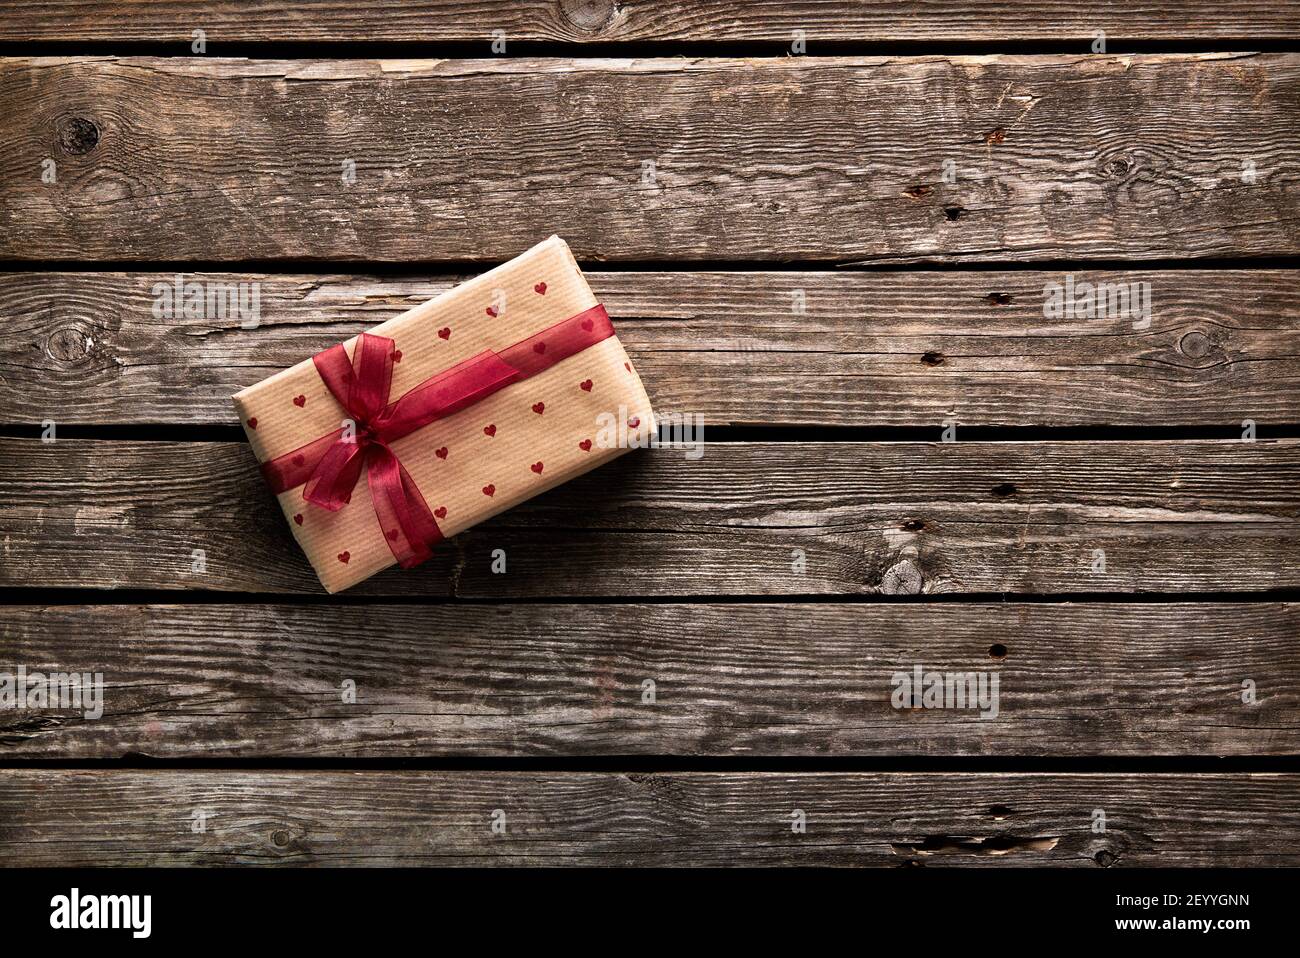 Gift box tied red ribbon with small hearts Stock Photo